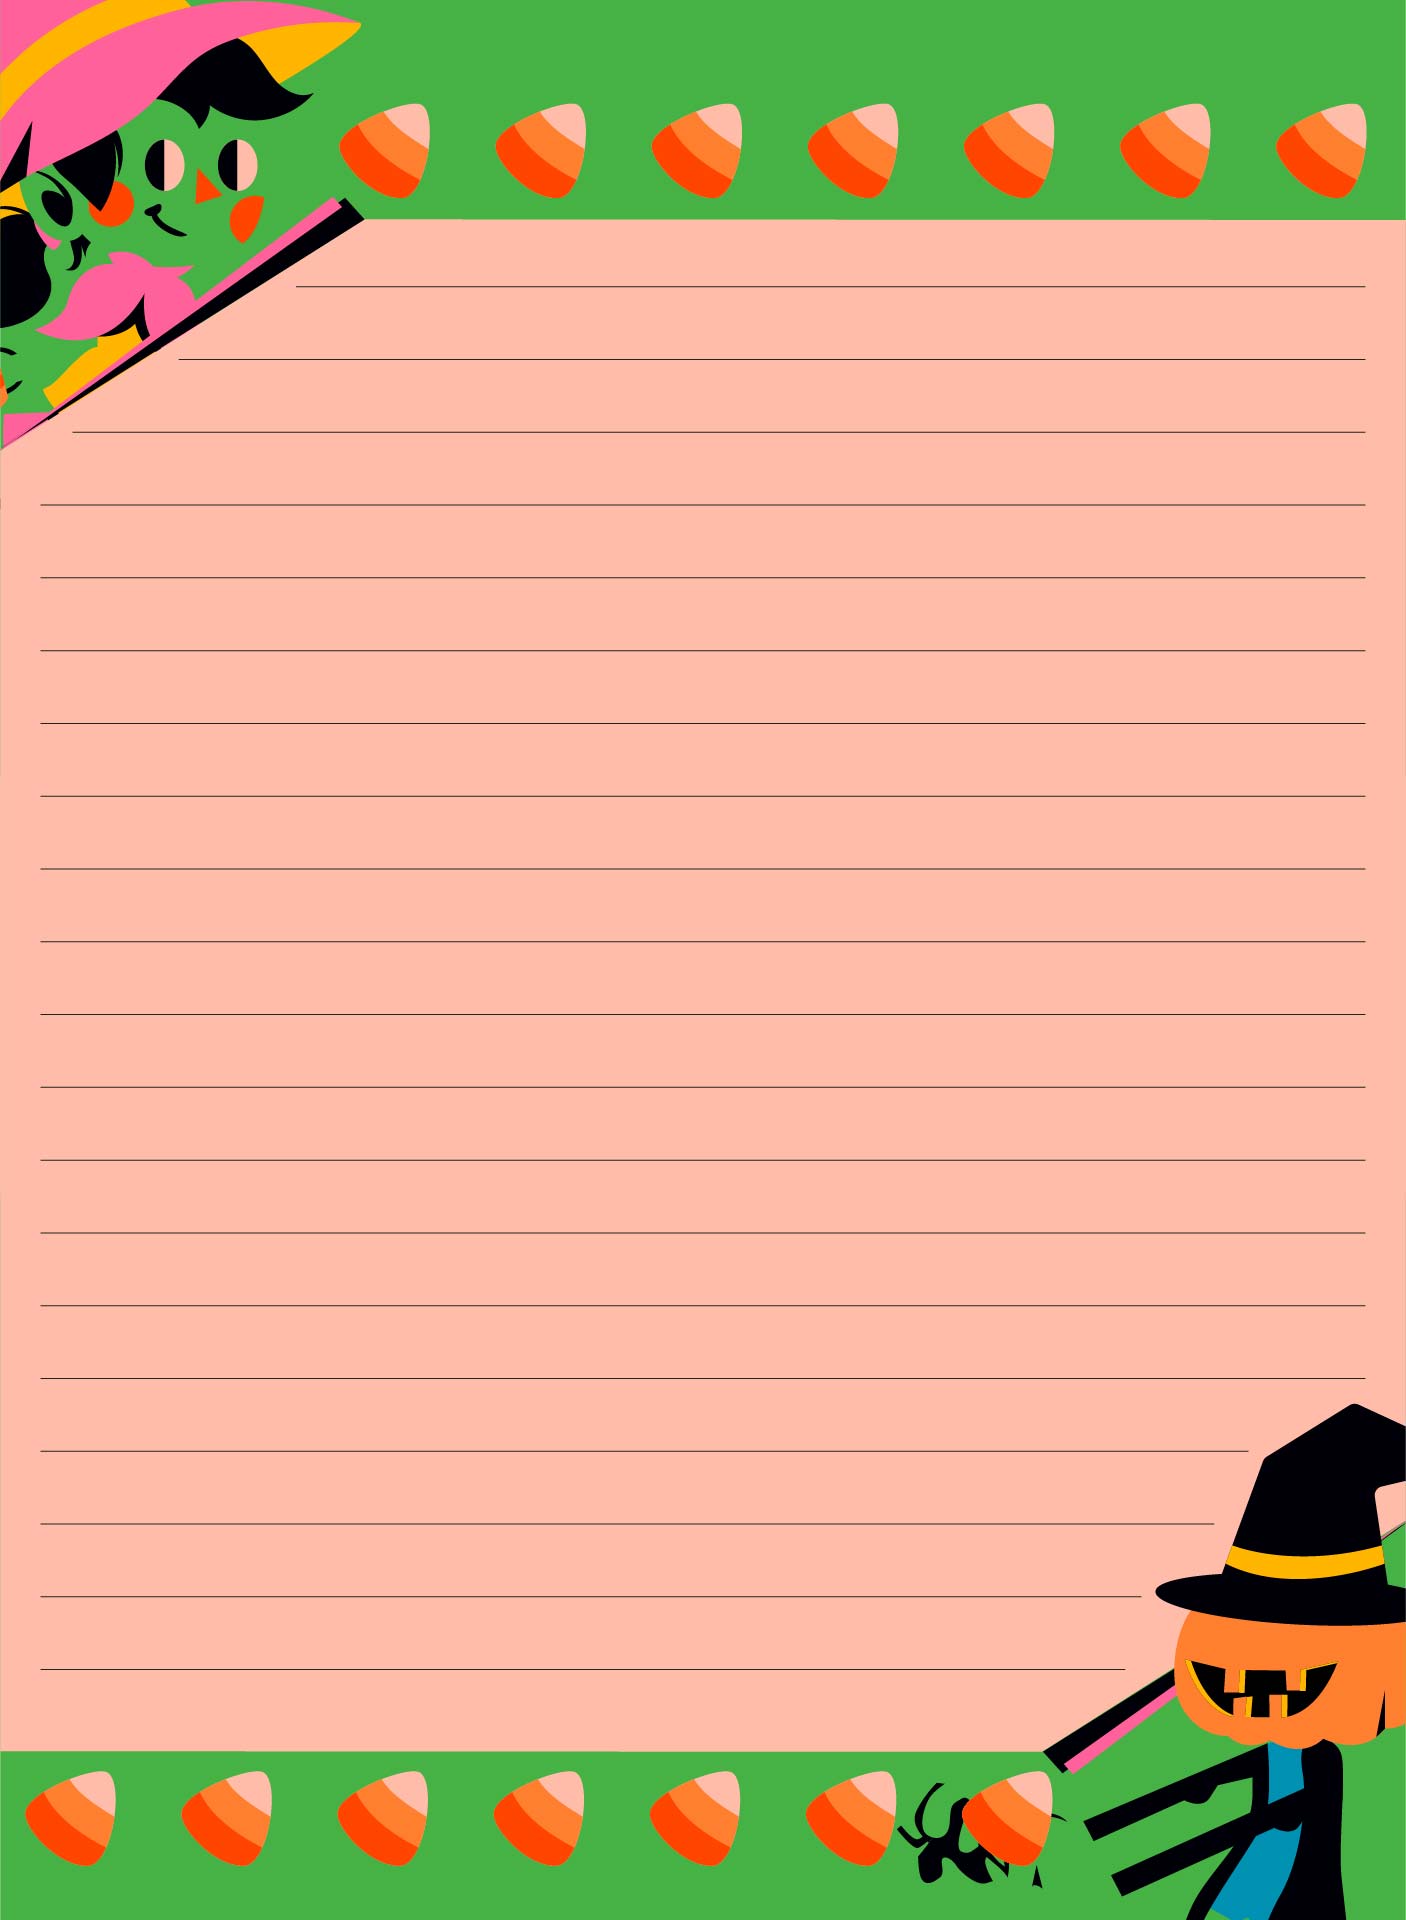 Printable Halloween Writing Paper With Green Border